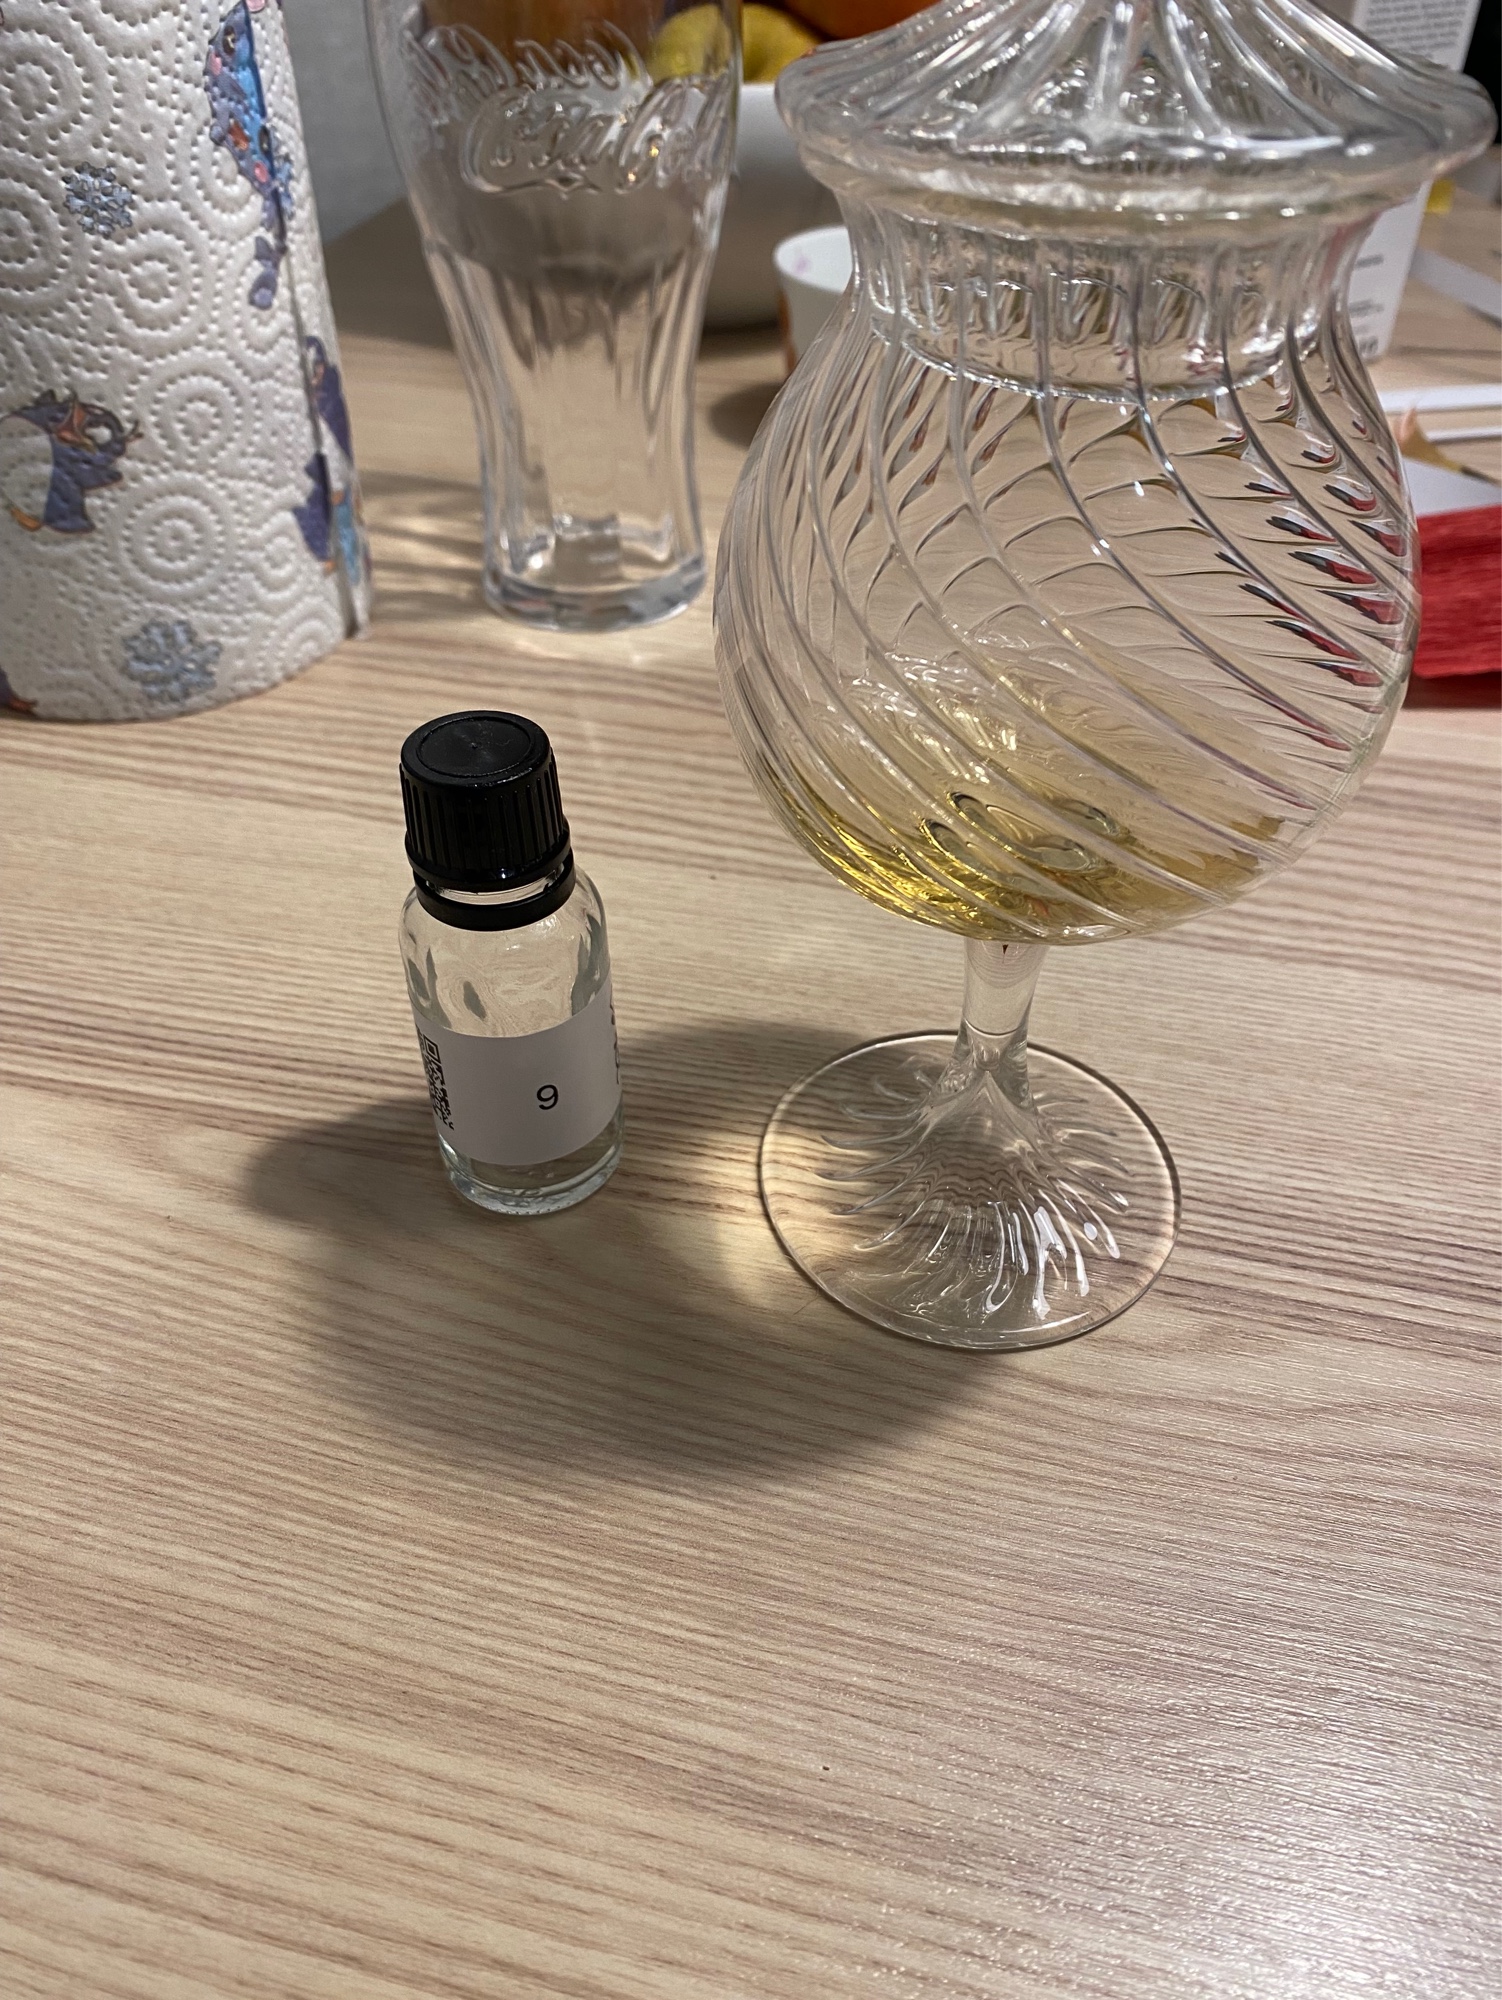 Photo of the bottle taken from user Galli33